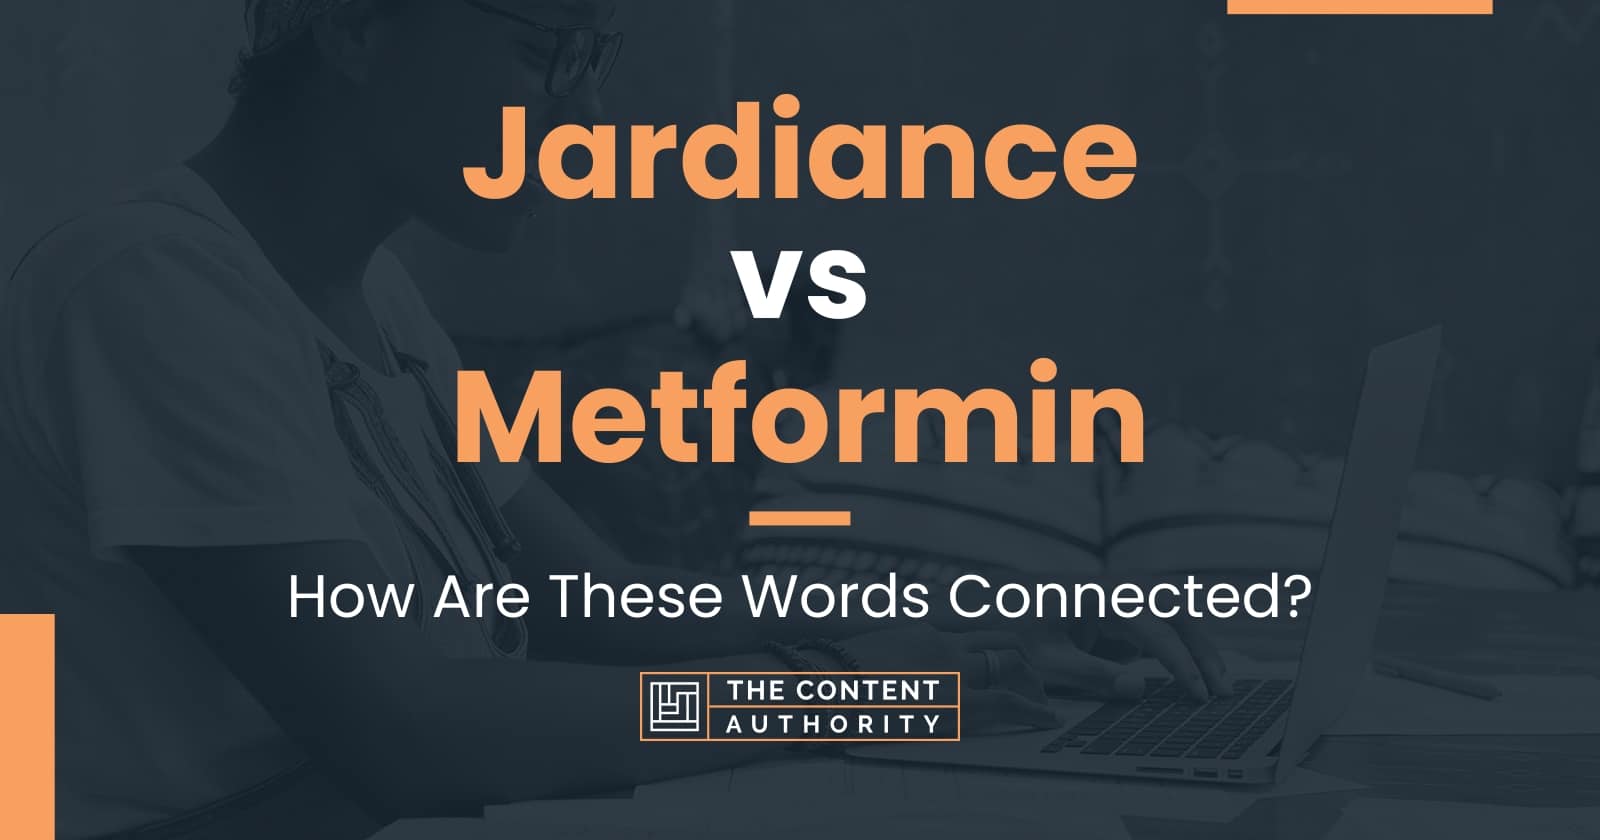 Jardiance vs Metformin: How Are These Words Connected?